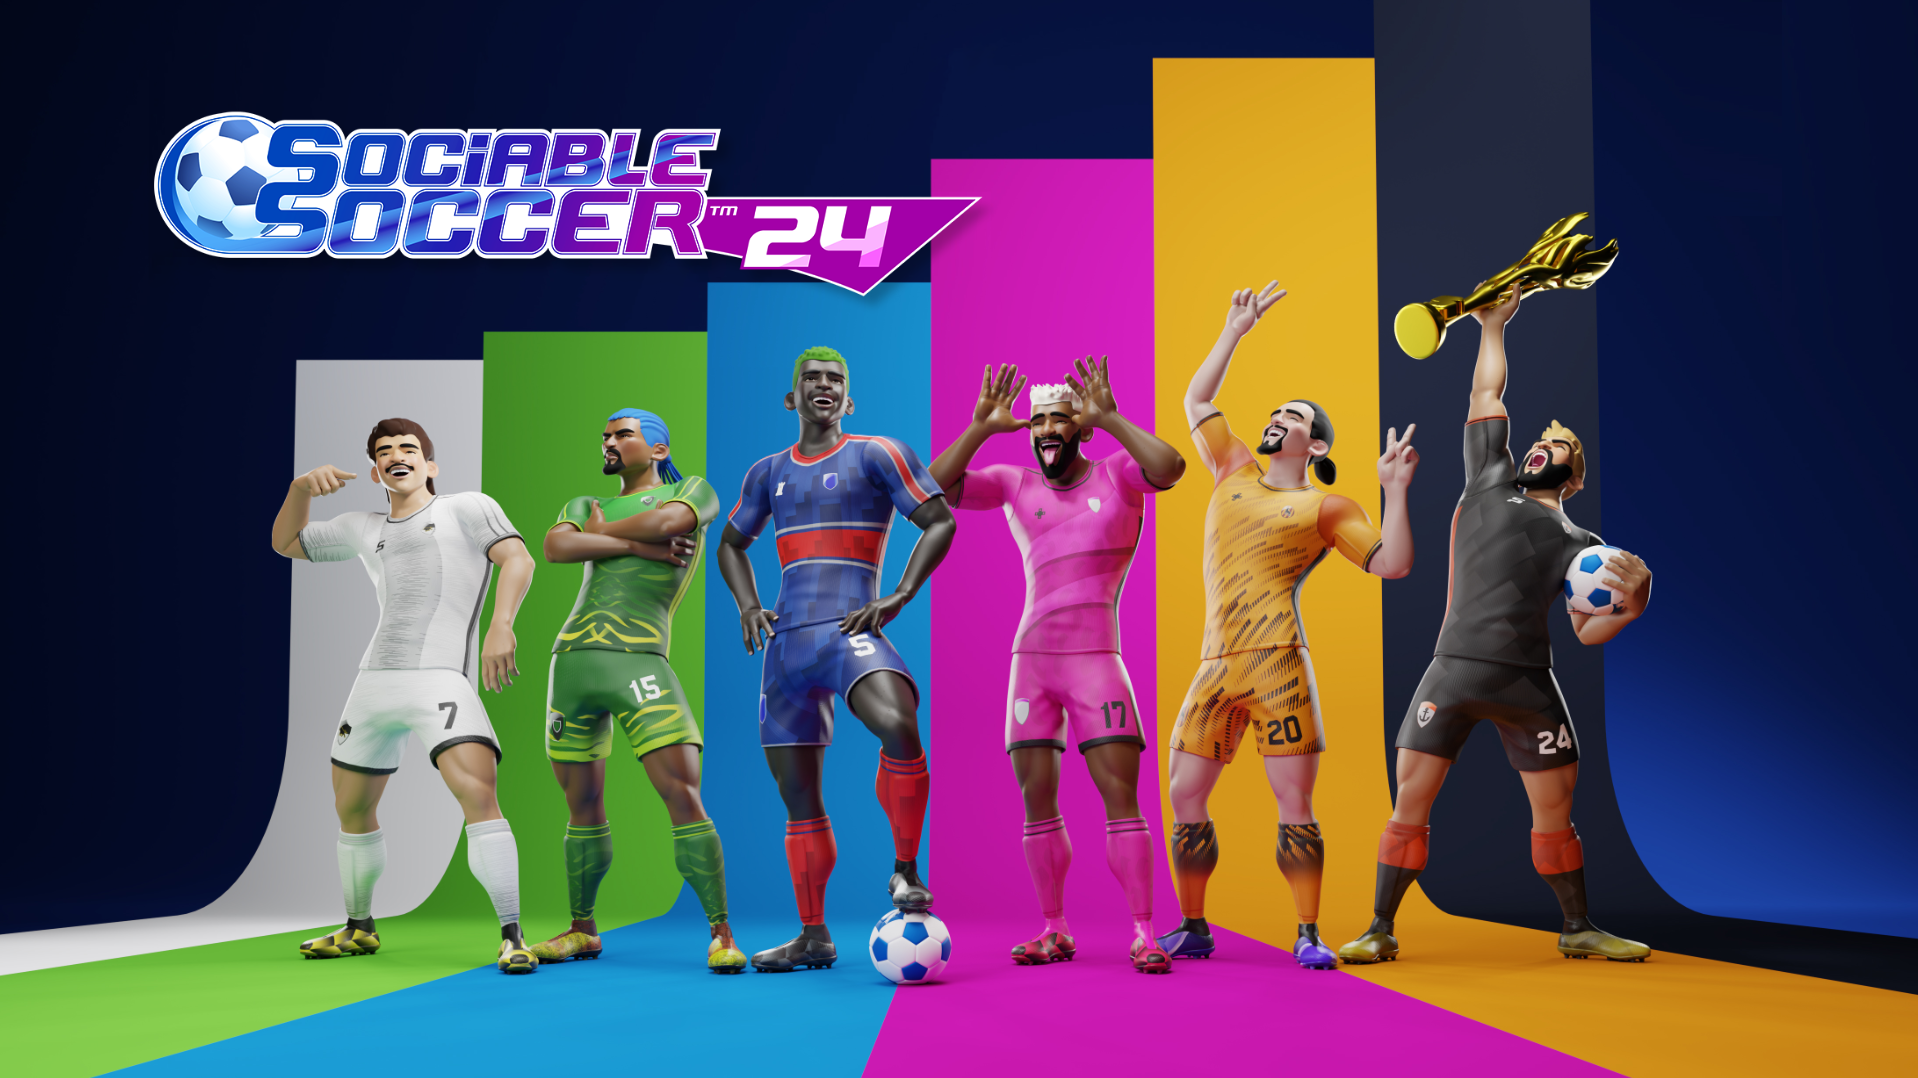 Sociable Soccer 24 to launch on PC and Console this year